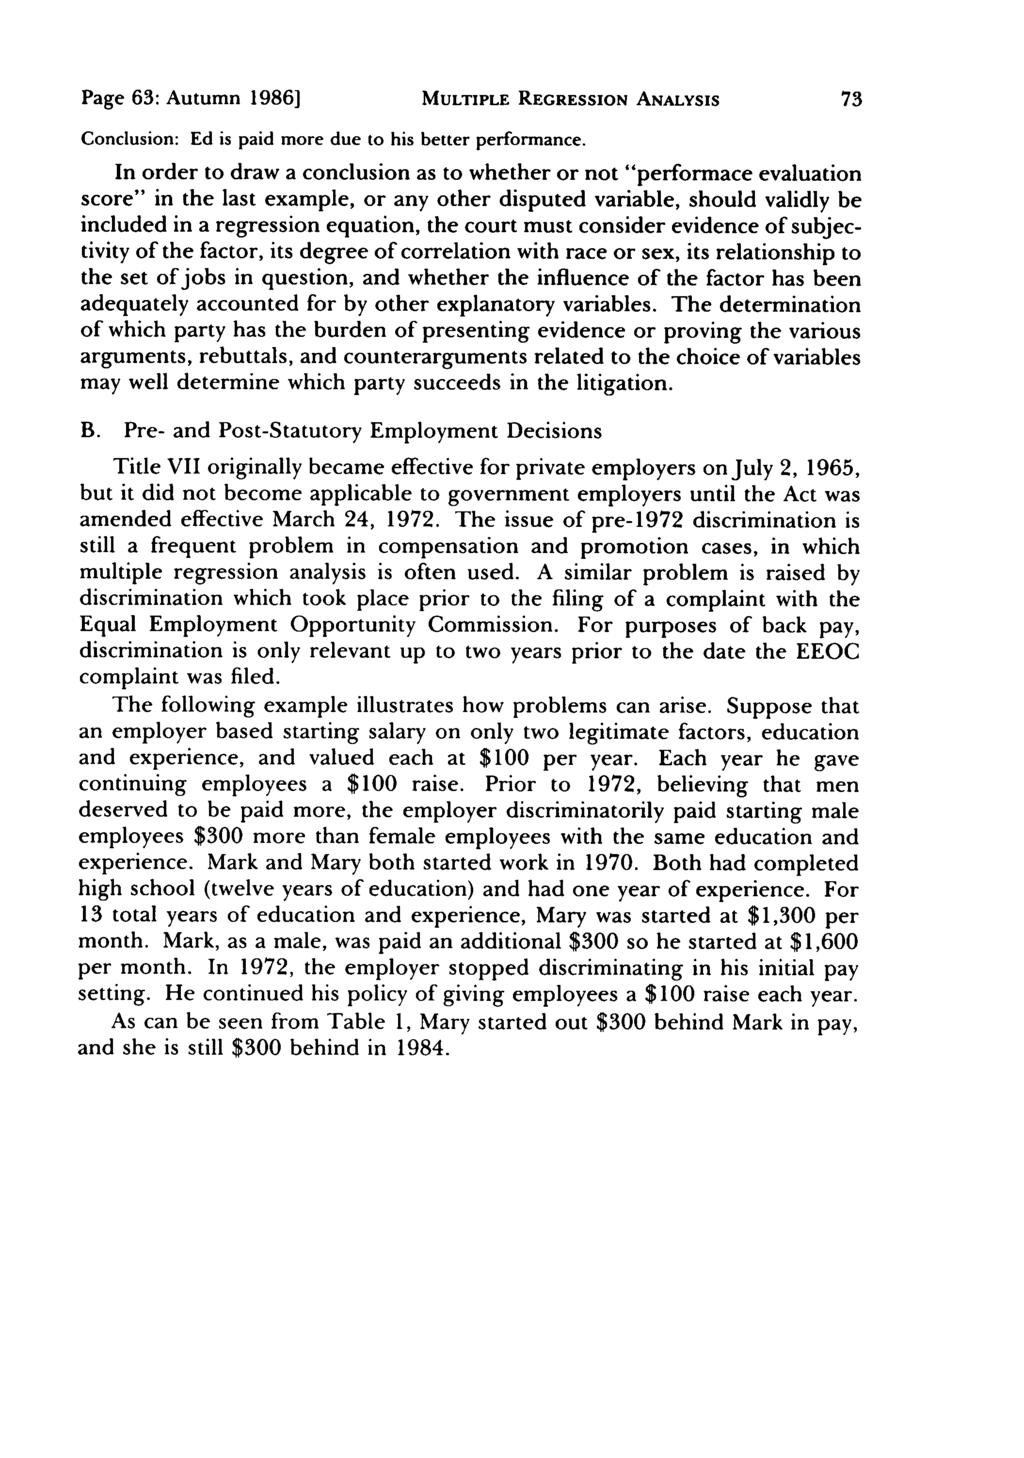 Page 63: Autumn 1986] MULTIPLE REGRESSION ANALYSIS Conclusion: Ed is paid more due to his better performance.